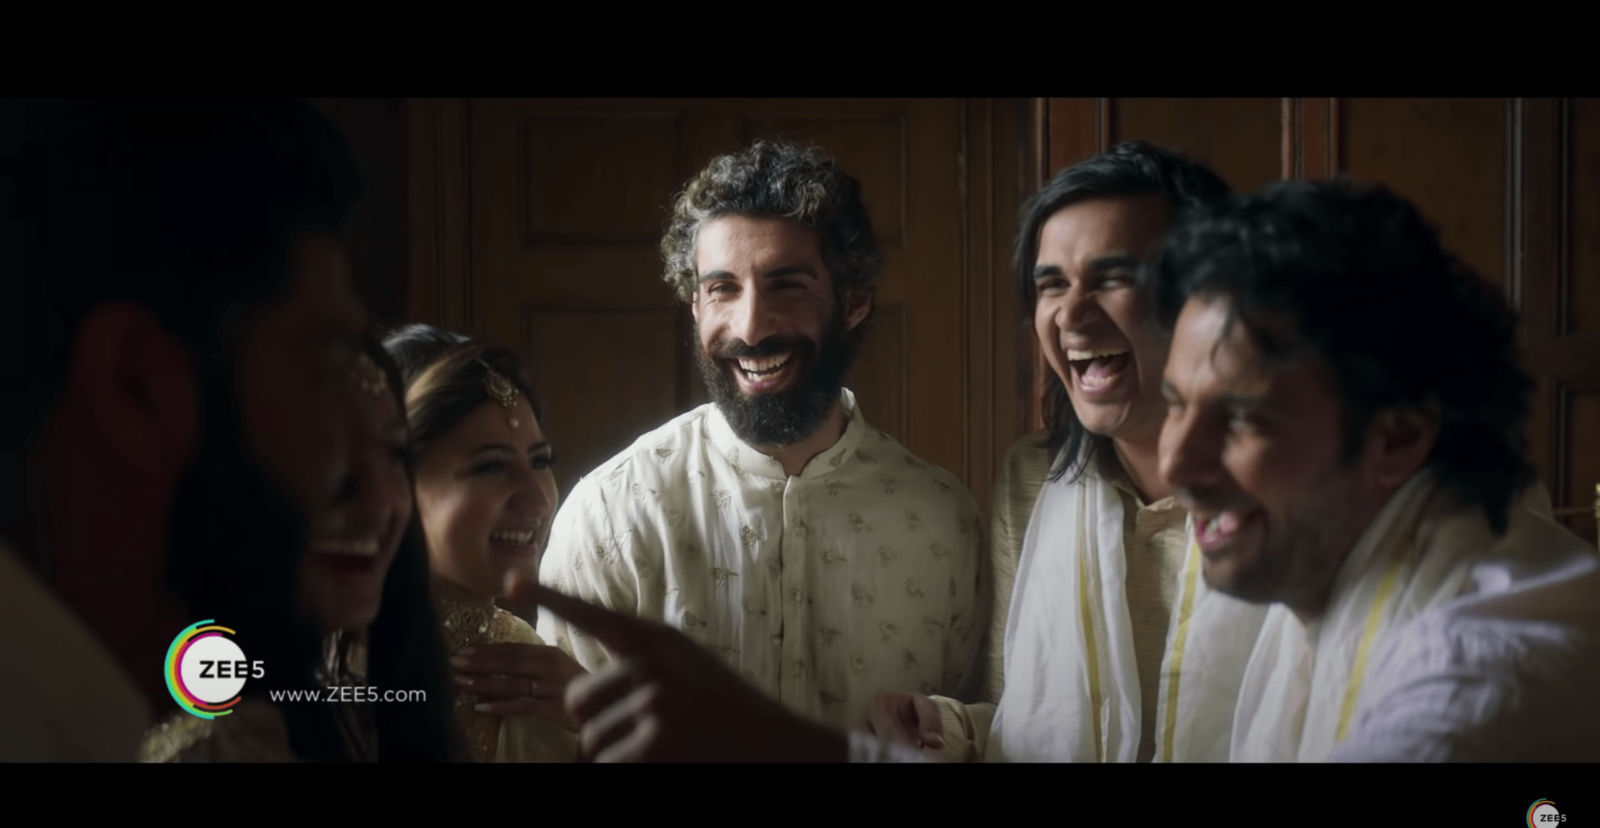 Taish on Zee5: Jim Sarbh’s latest is a series, and a movie too